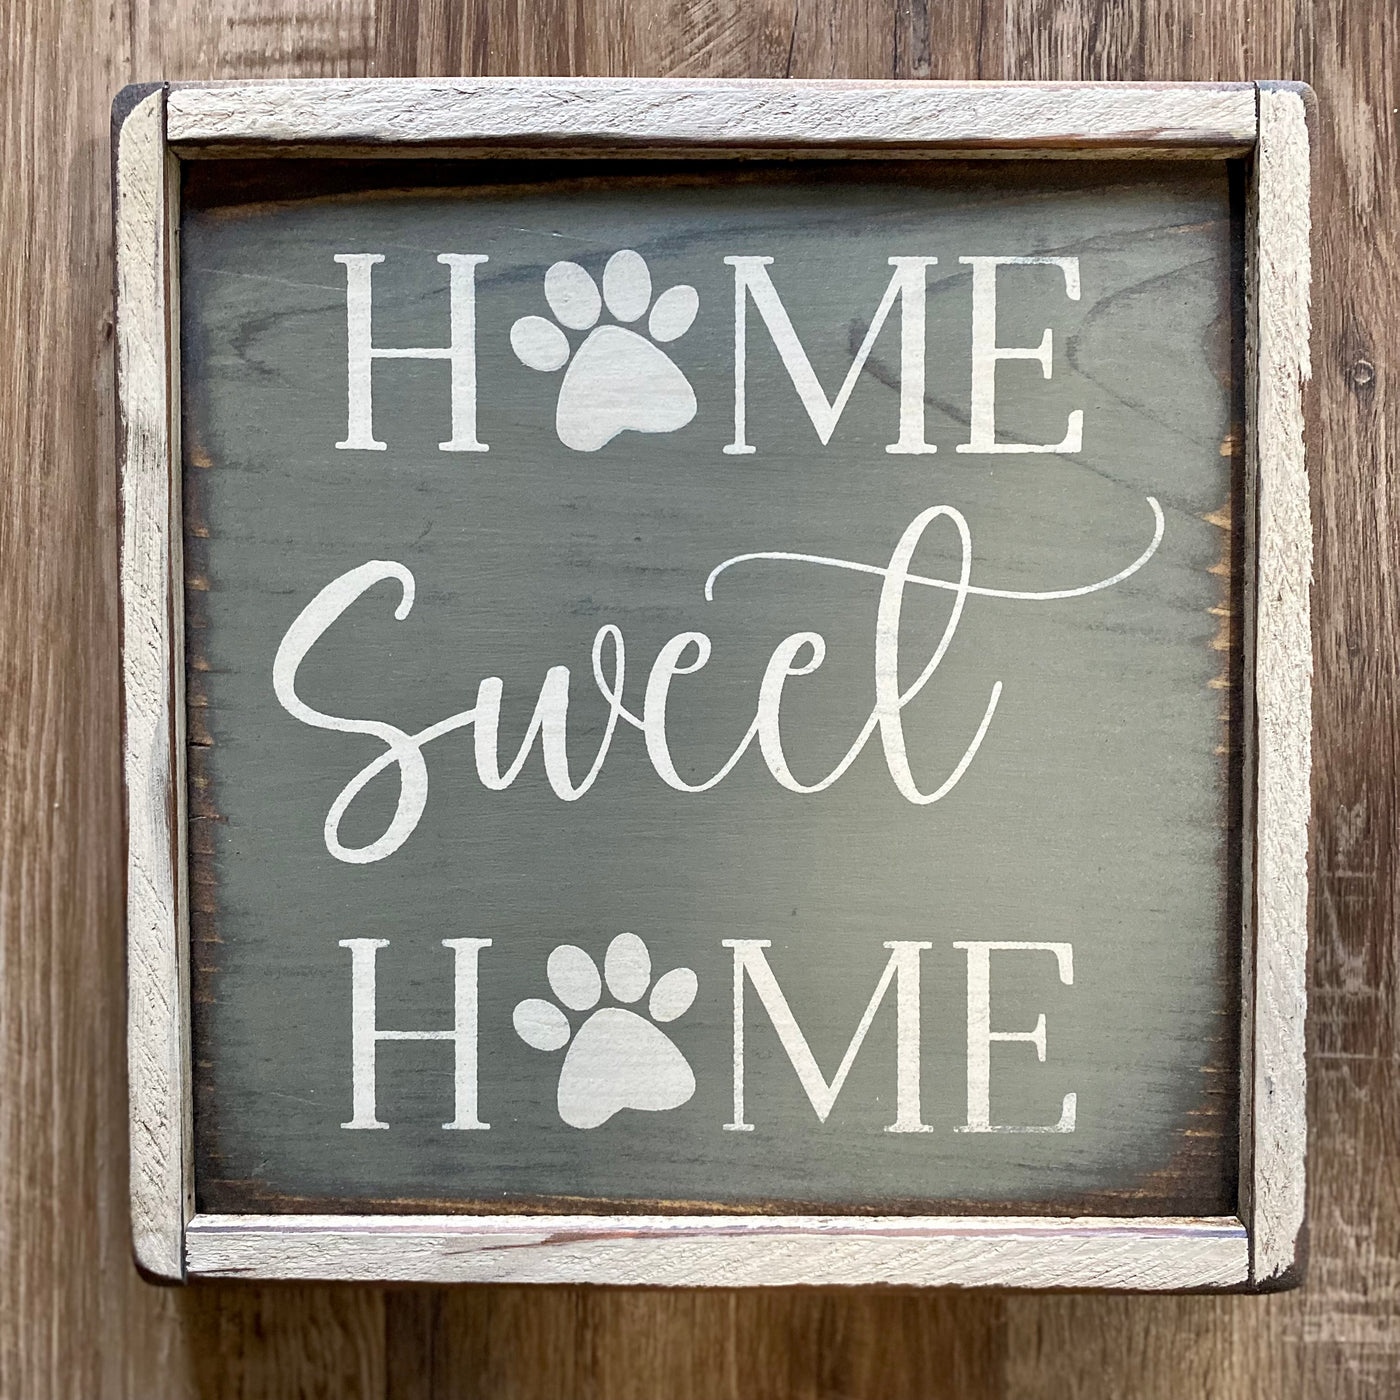 Handmade wood sign reads Home Sweet Home with paw prints in place of the “O” in Home